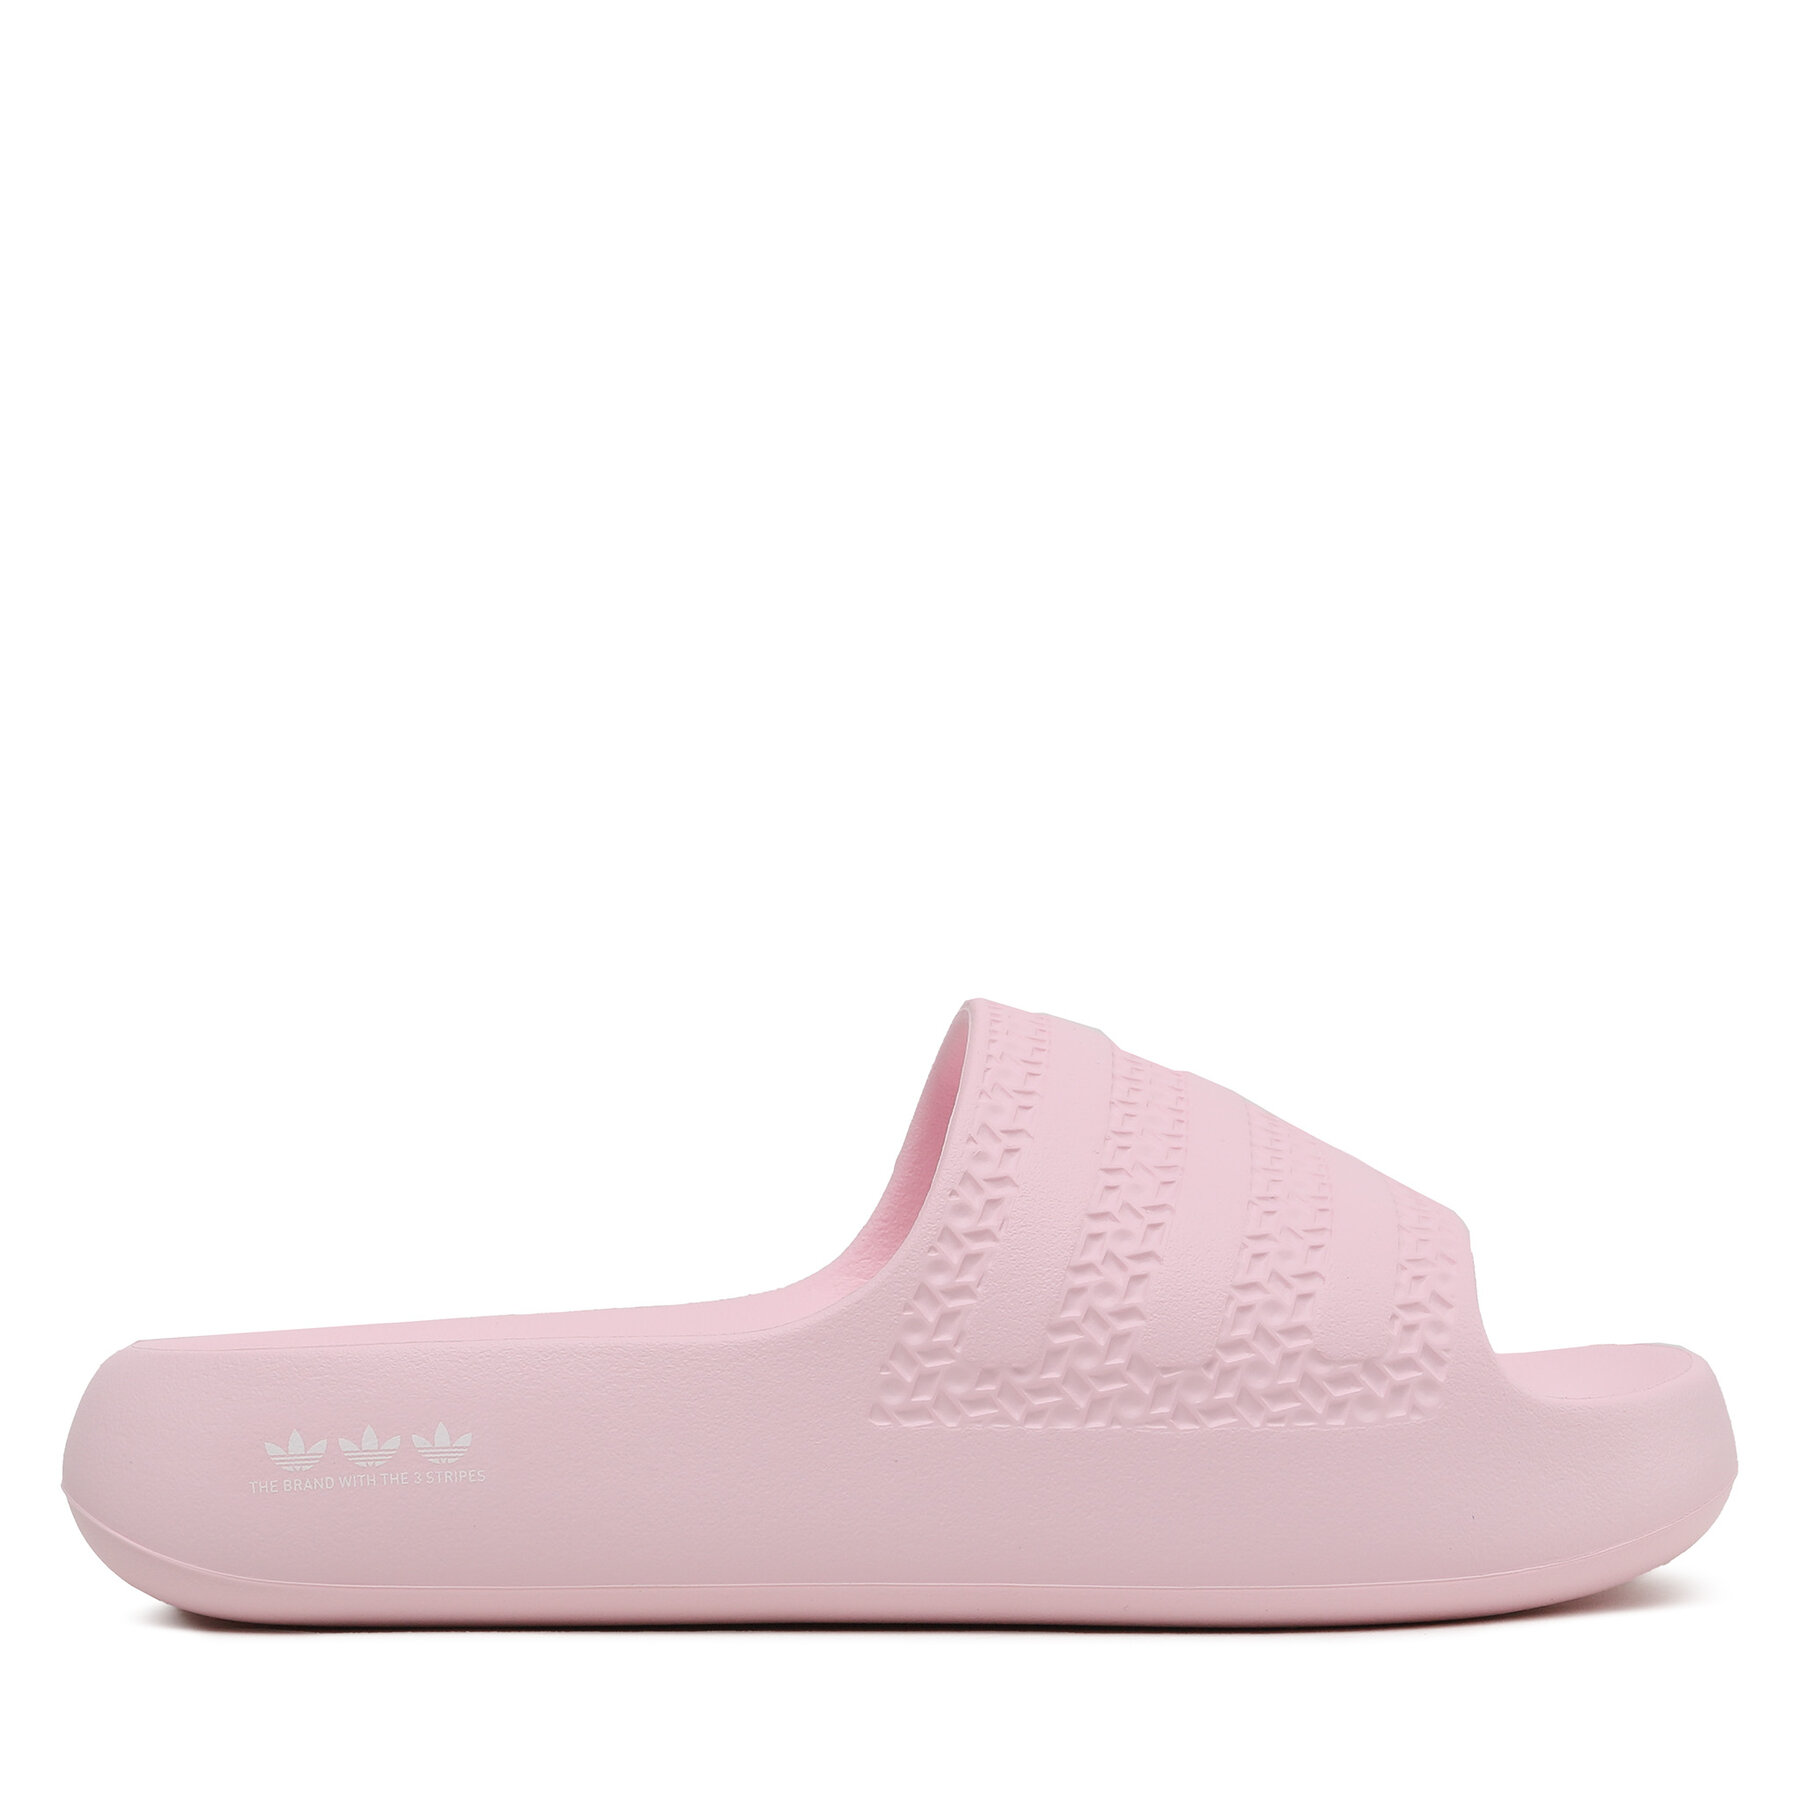 Adidas Ayoon Adilette W clear pink/clear pink/cloud white